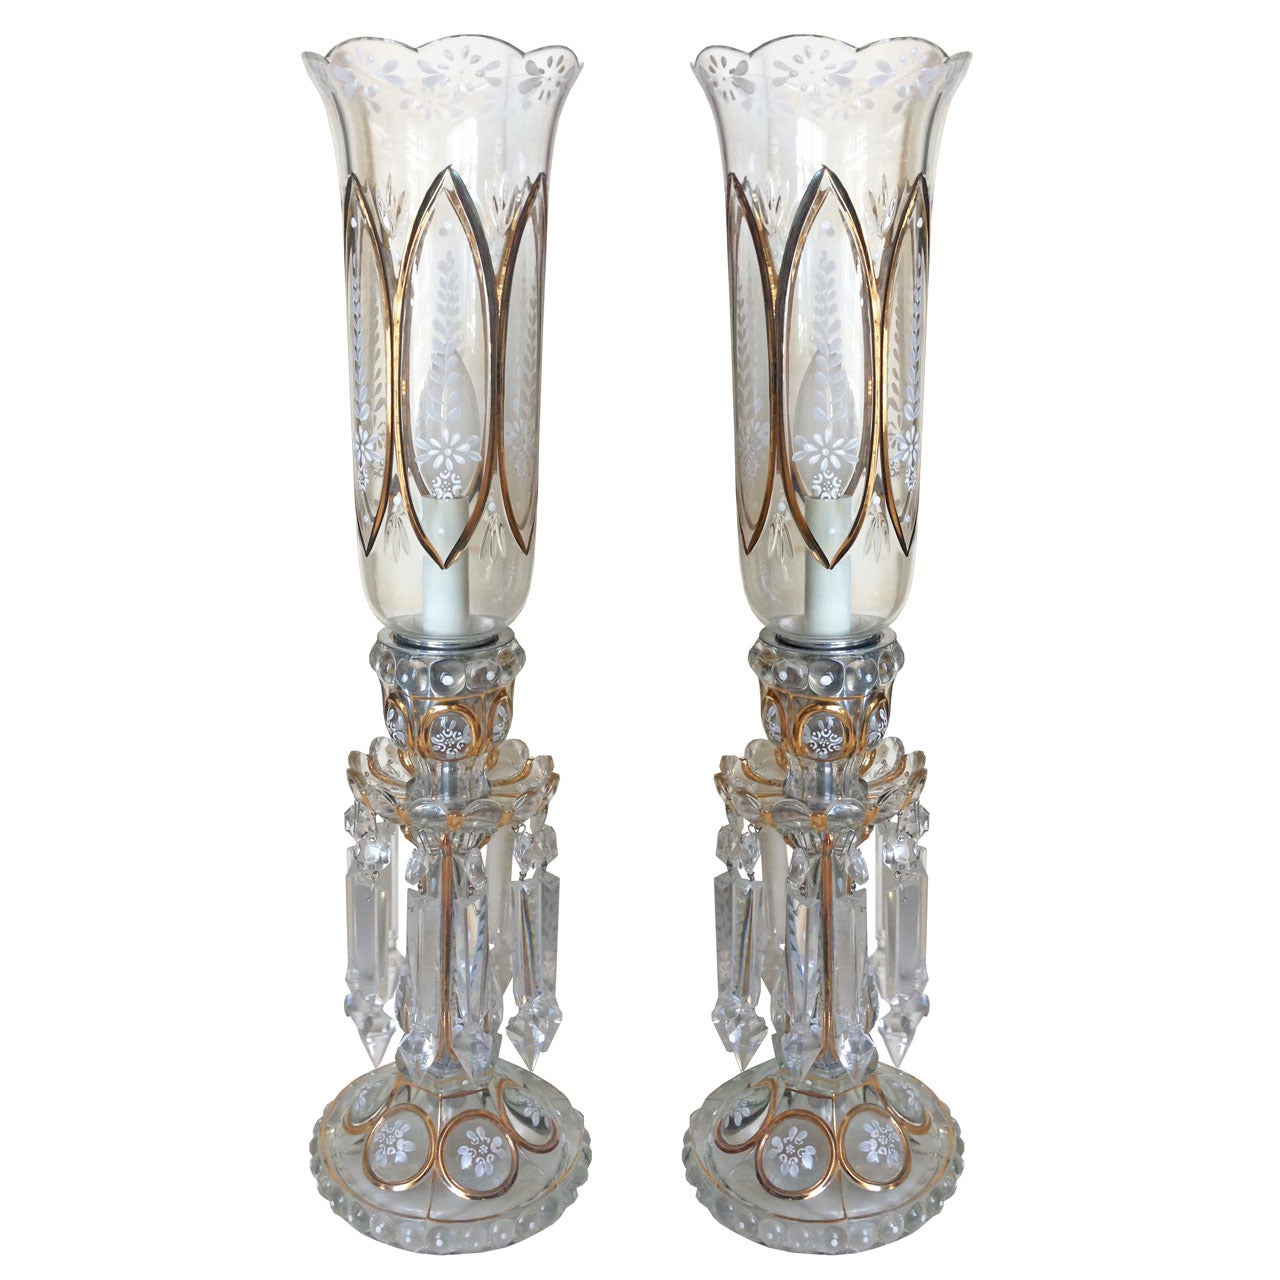 Lovely Baccarat Clear Glass Luster Candelabra Lamps c1900